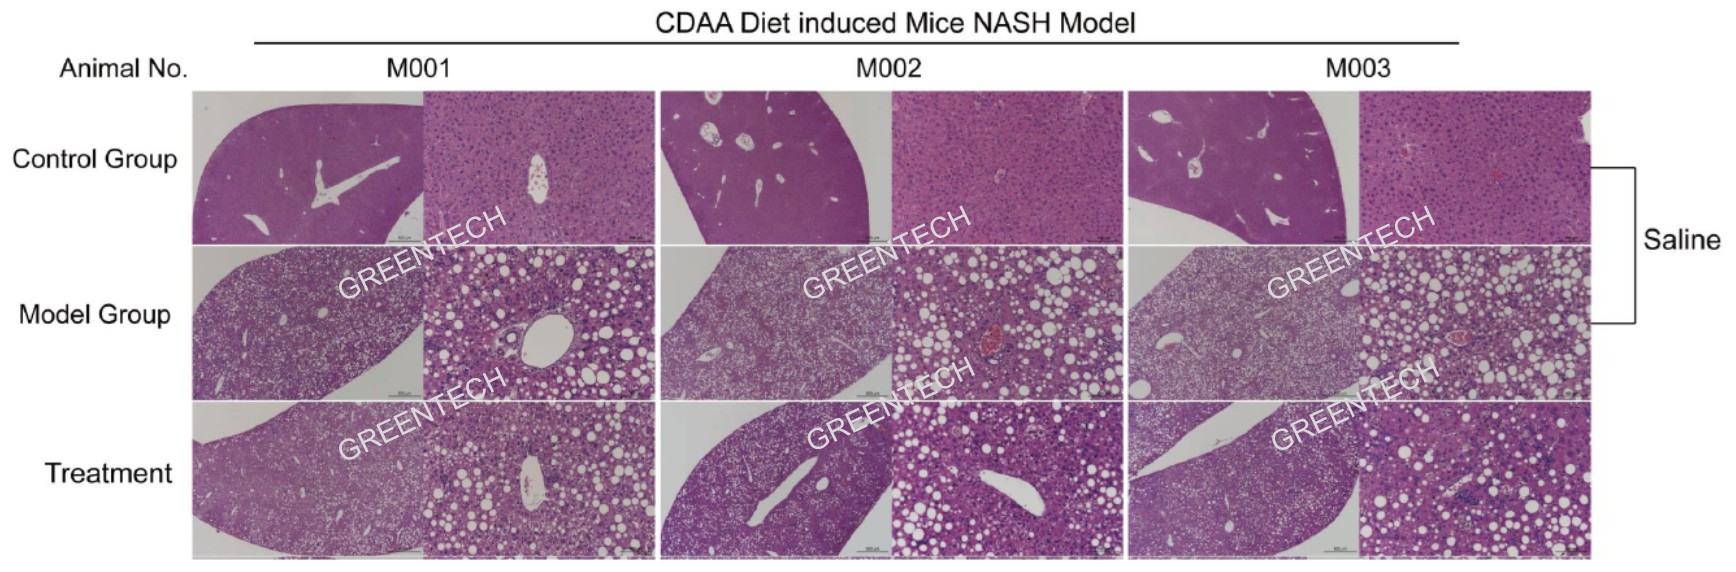 Liver histopathology of rodent NASH models induced by CDAA diet feeding for 8 weeks.png